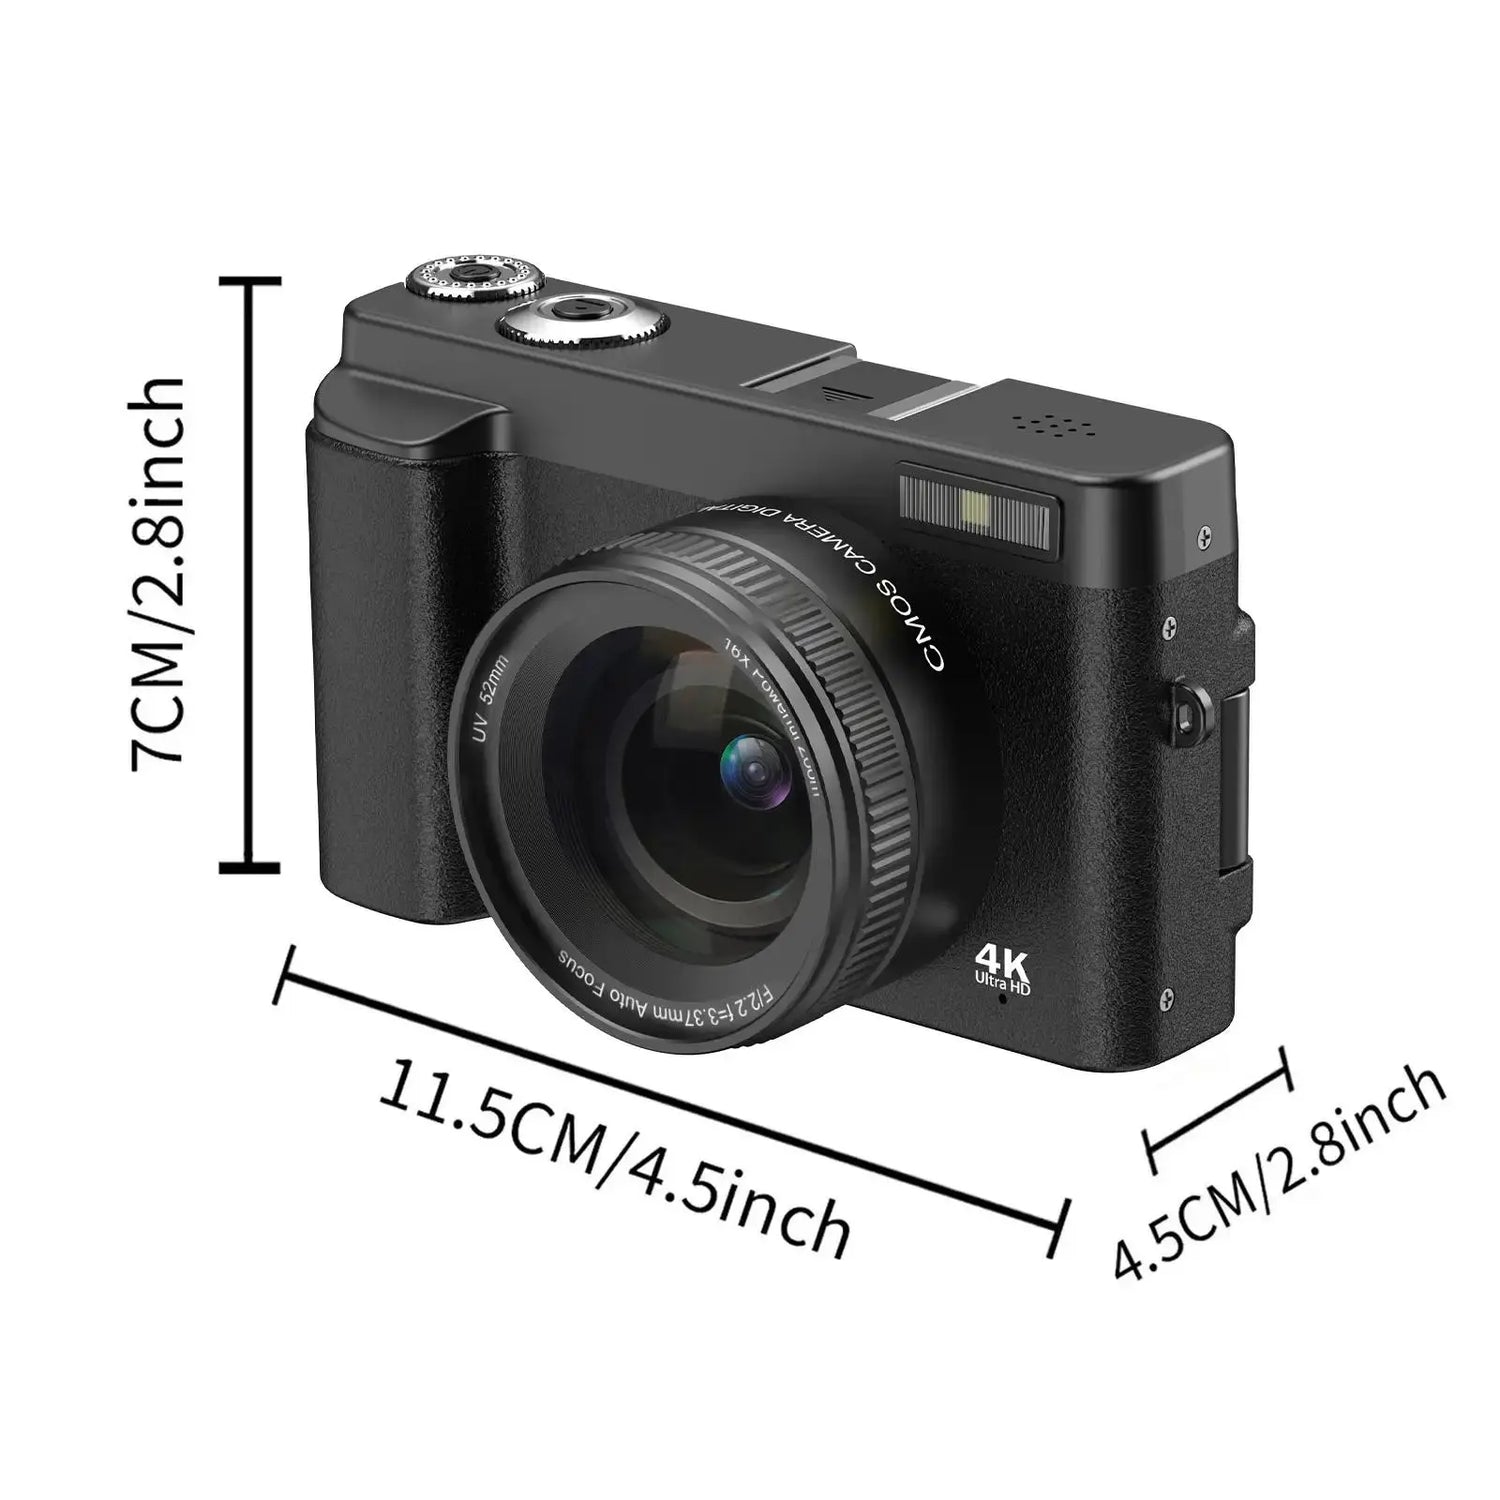 DC101 Multi-Functional 4K Digital Cameras for Music Festival, 1 Piece Auto Focus 48MP Digital Camera for Vlogging, 16X Magnification Video Camera with 32G Memory Card, 4K Video Recording 180 Degree Flippable Display Camera, Gift for Photography Beginners